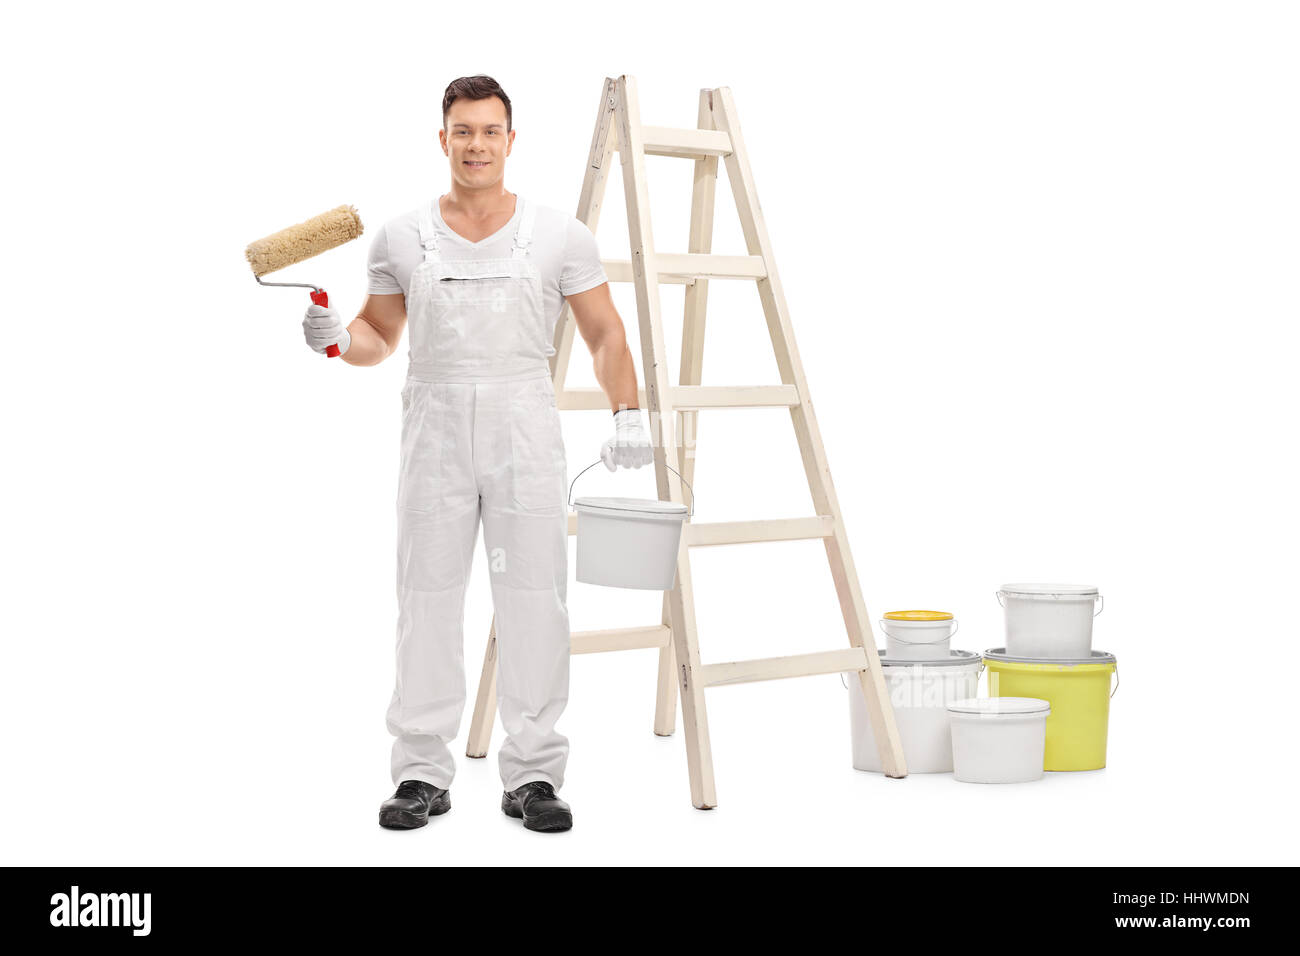 Painter holding a paint roller and a color bucket in front of a ladder isolated on white background Stock Photo